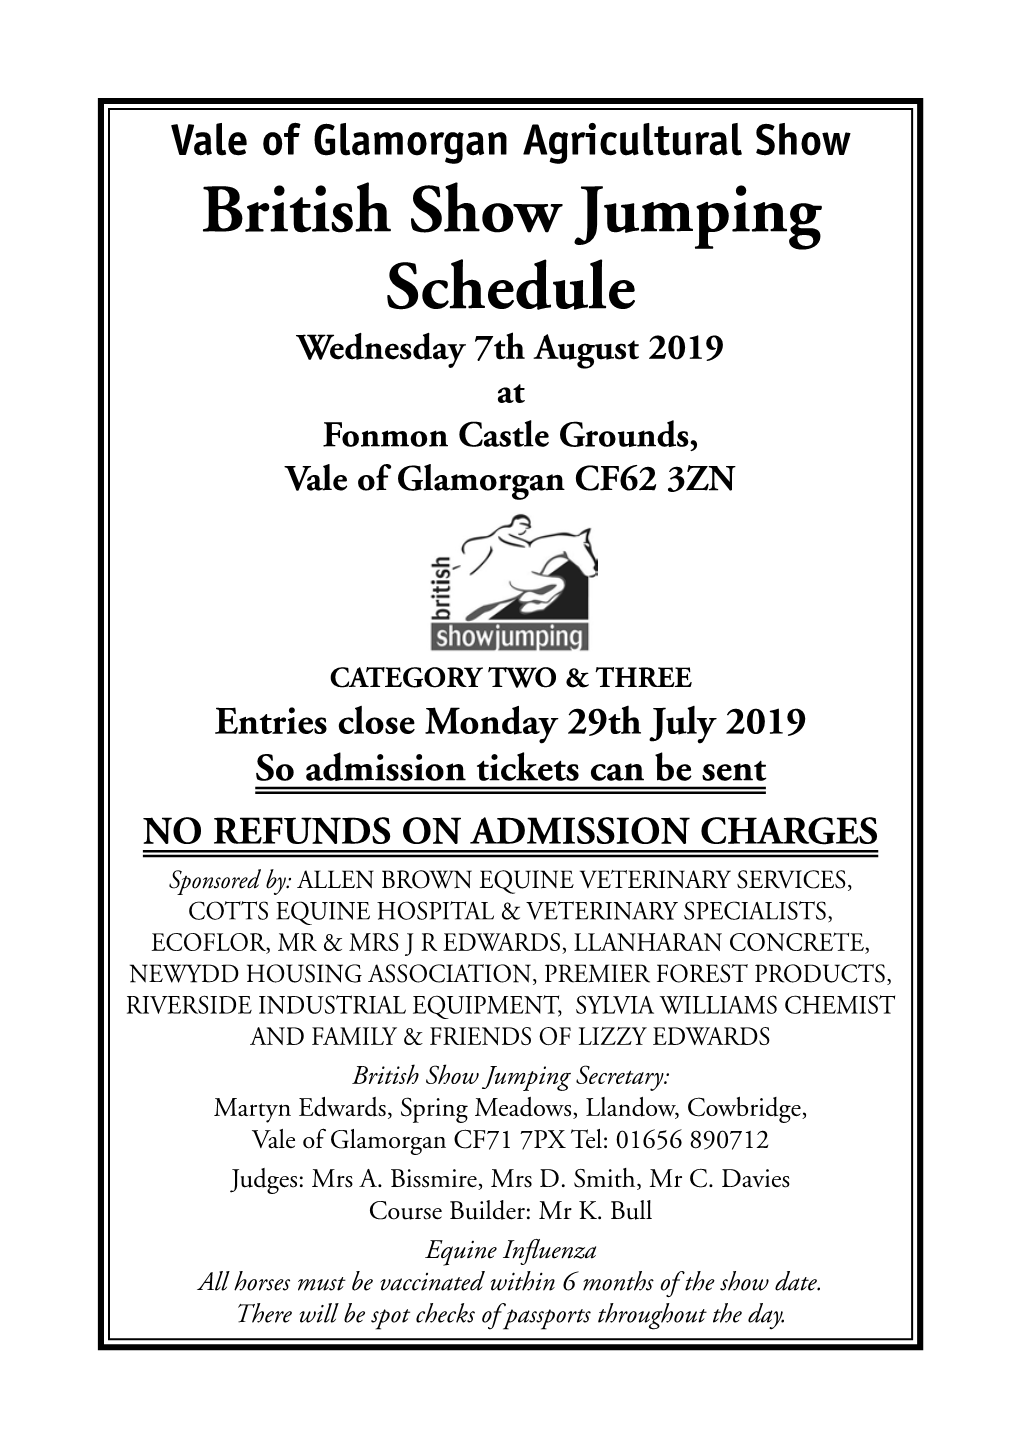 British Show Jumping Schedule Wednesday 7Th August 2019 at Fonmon Castle Grounds, Vale of Glamorgan CF62 3ZN